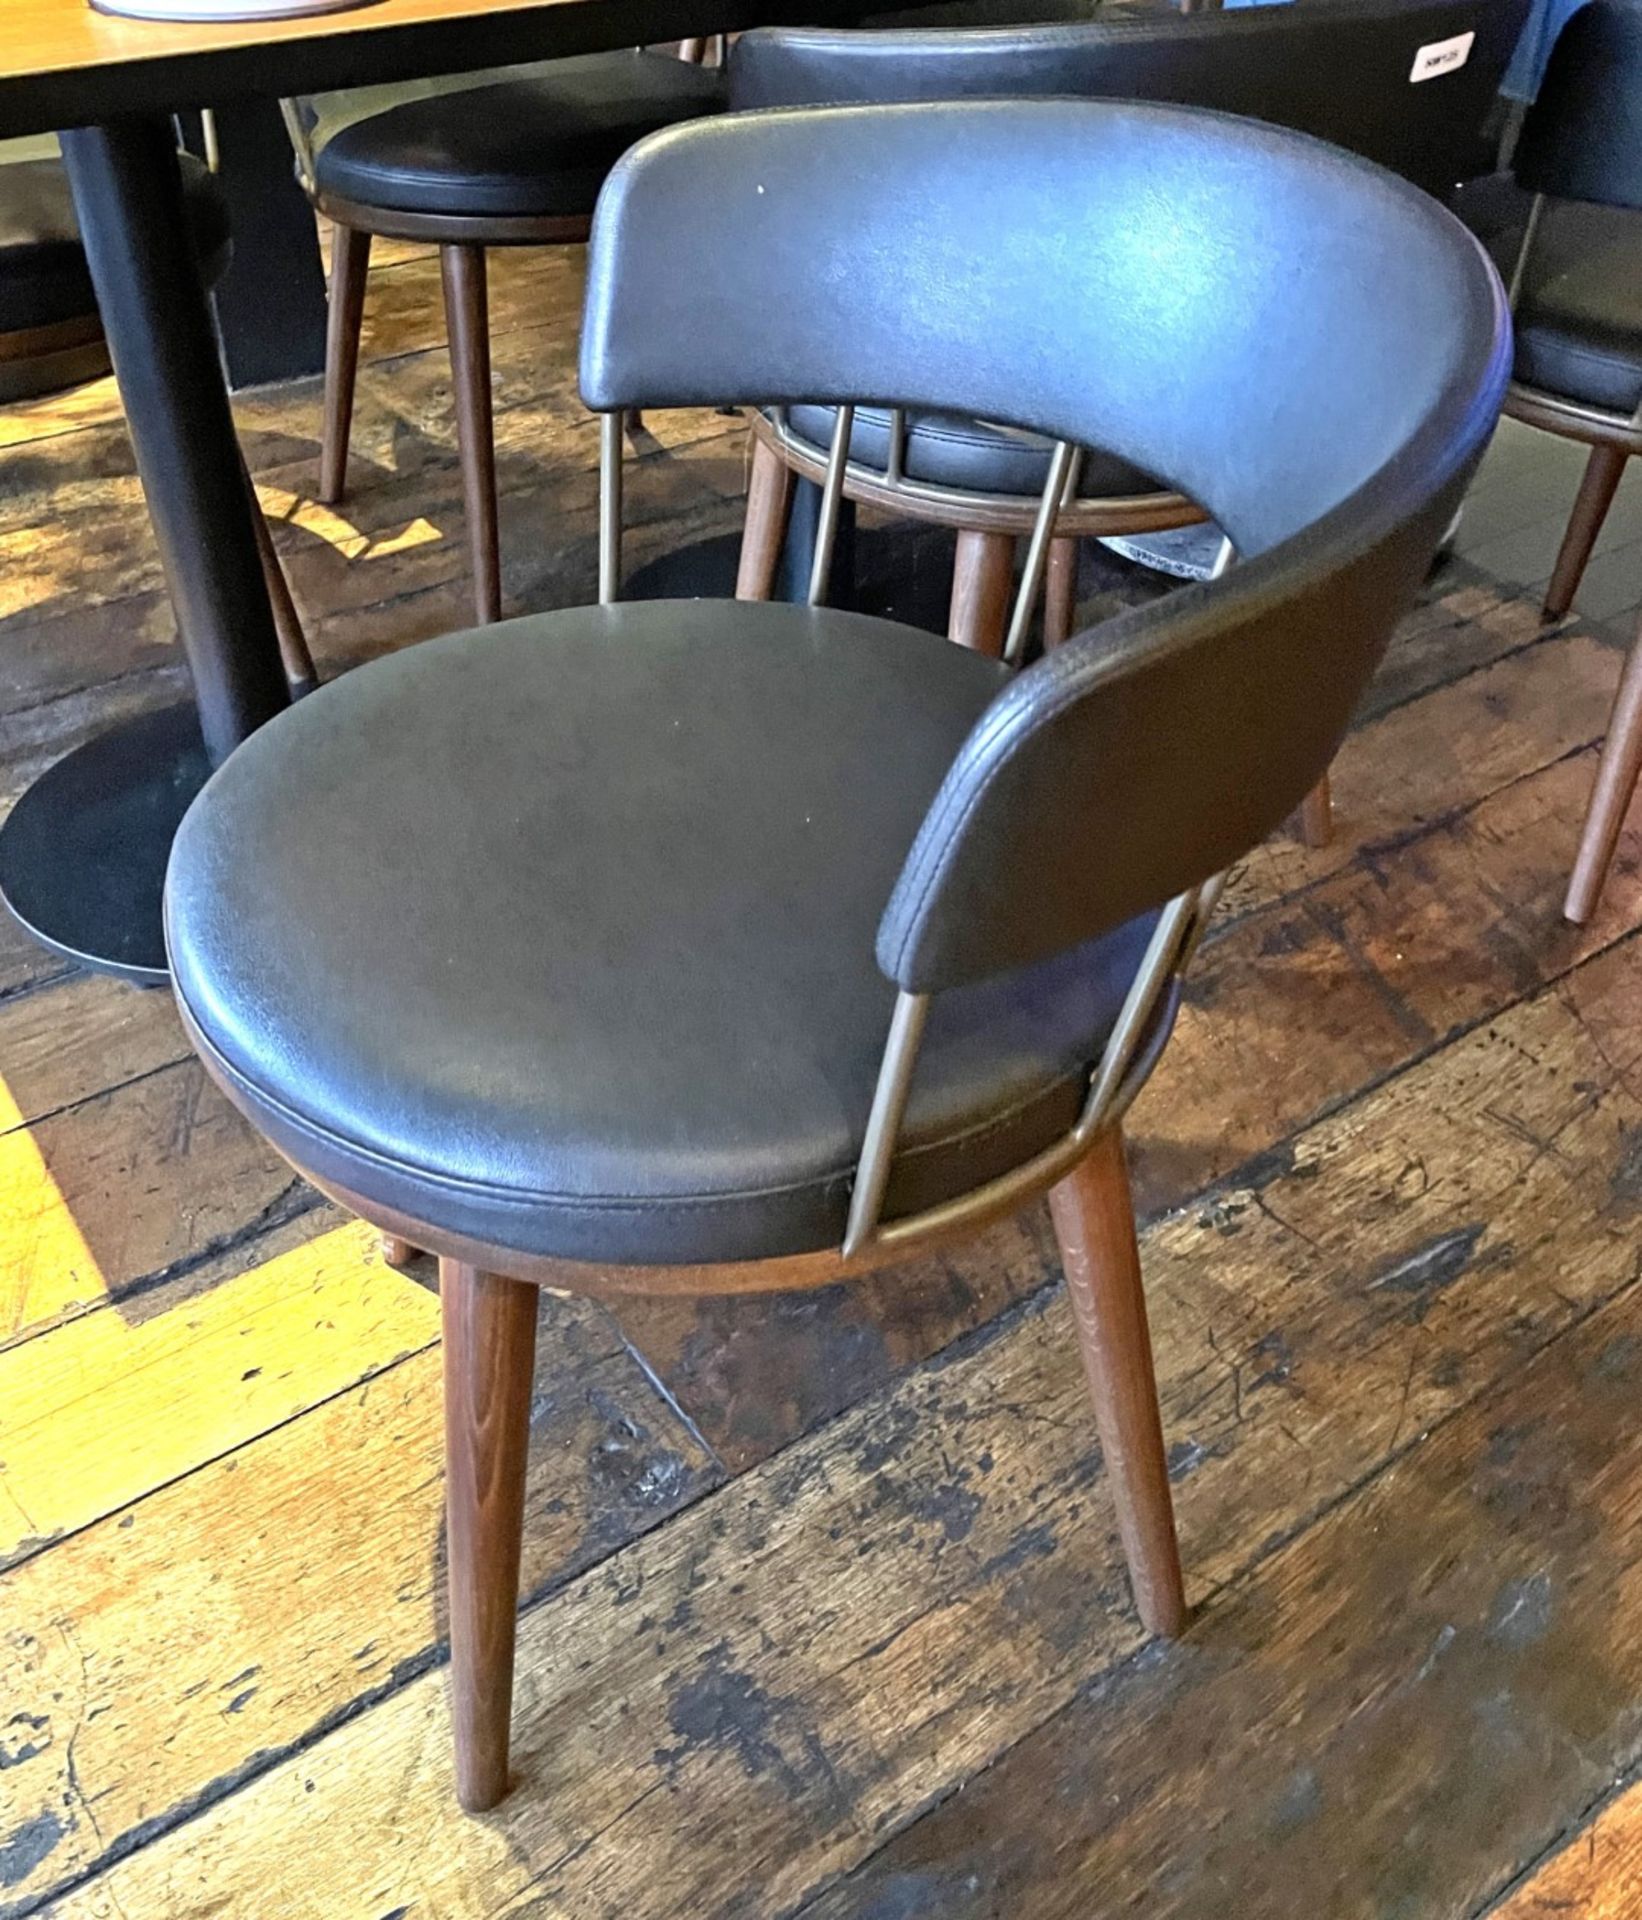 2 x PARLA 'Meru' Casual Dining Chairs Featuring a Powder Coated Metal Structure & Solid Beech Legs - Image 2 of 15